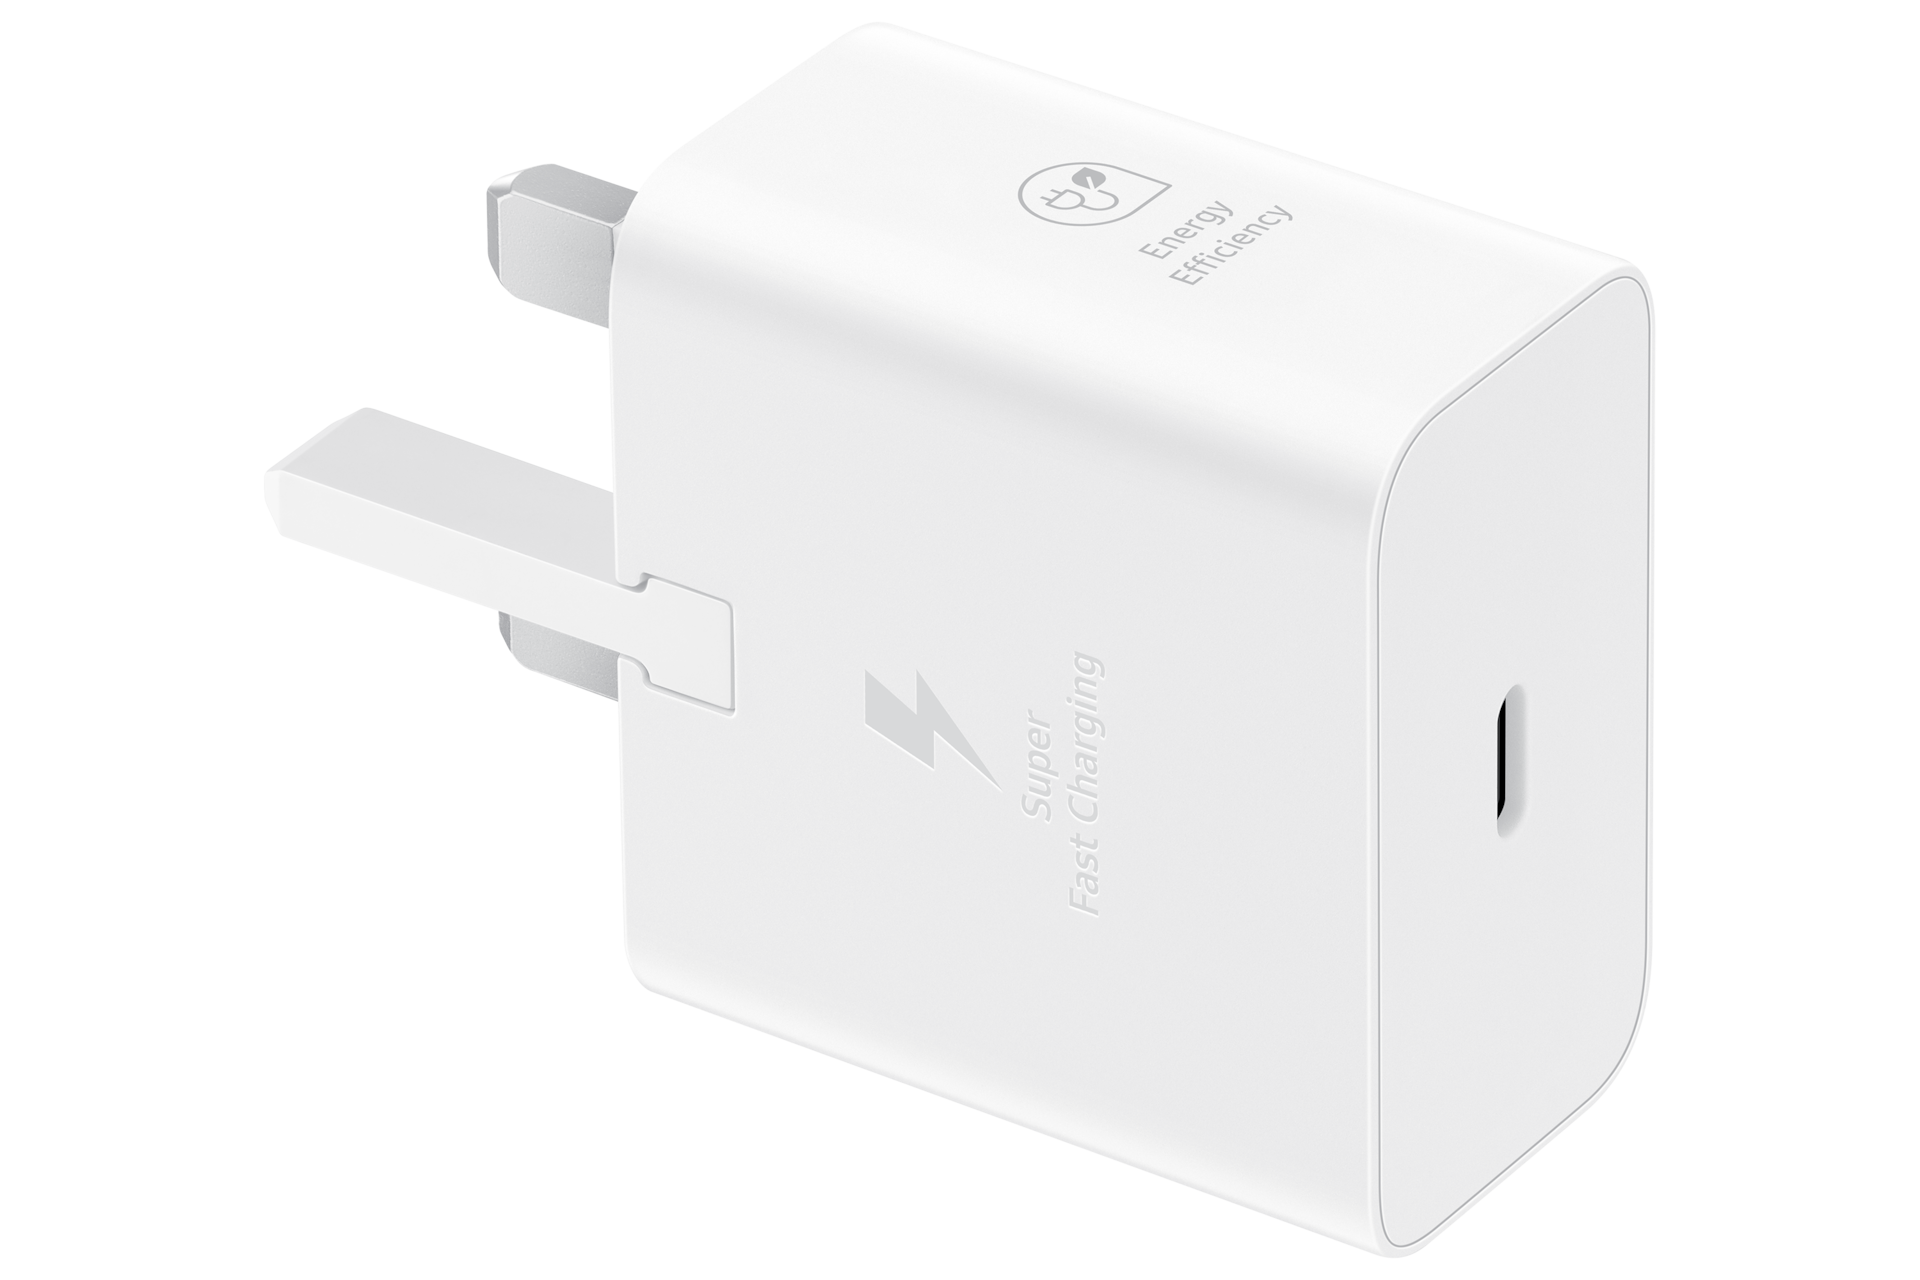 25W PD Power Adapter with USB C Cable, White Mobile Accessories -  EP-T2510XWEGUS